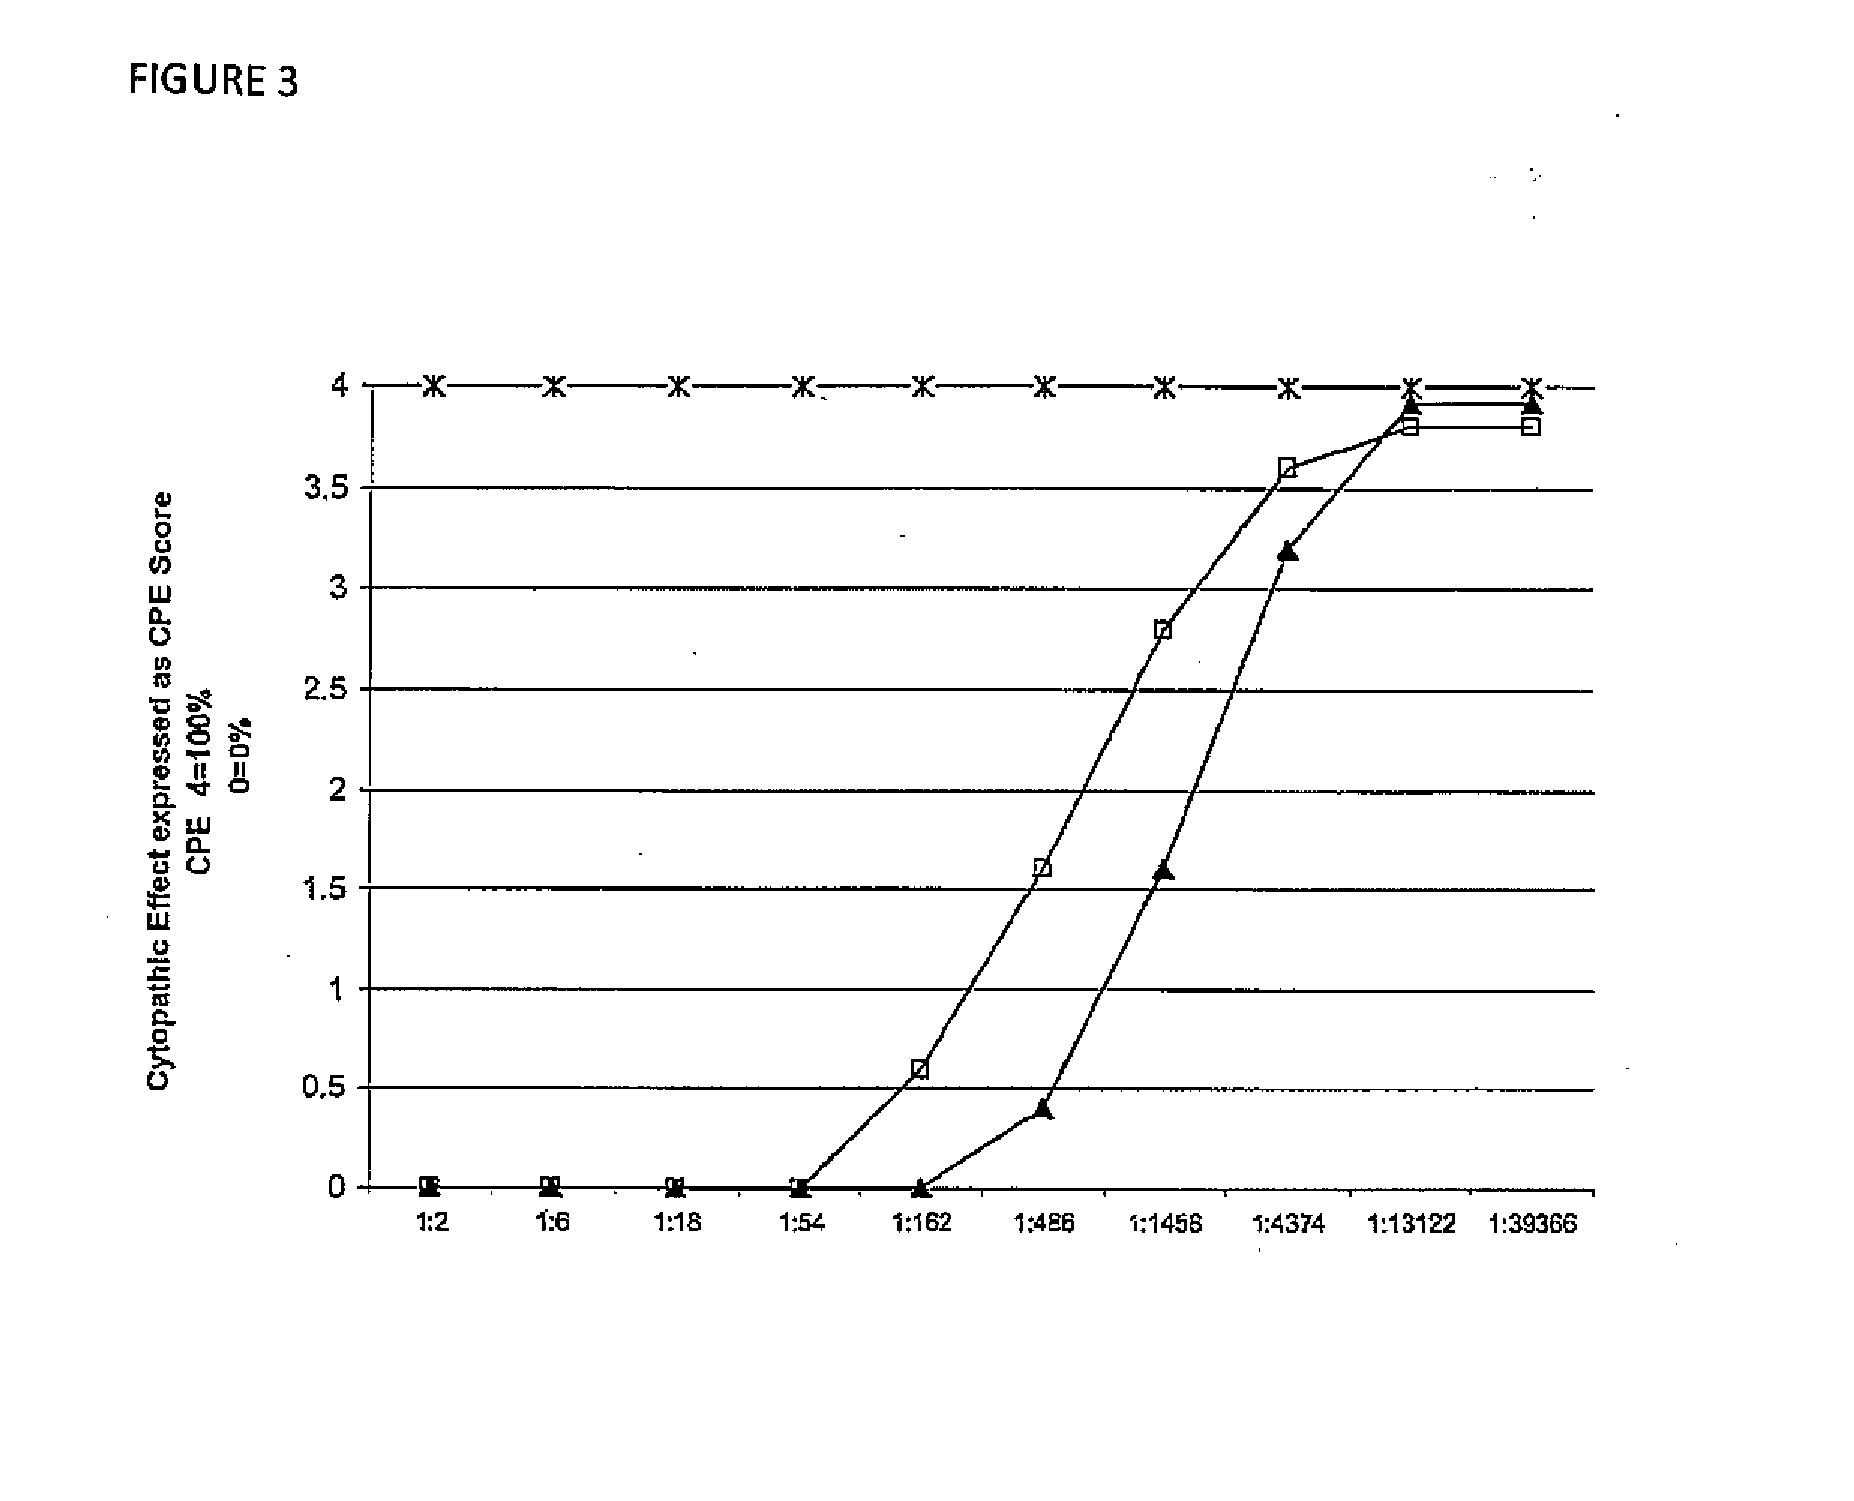 Polyclonal Antibodies Against Clostridium Difficile and Uses Thereof